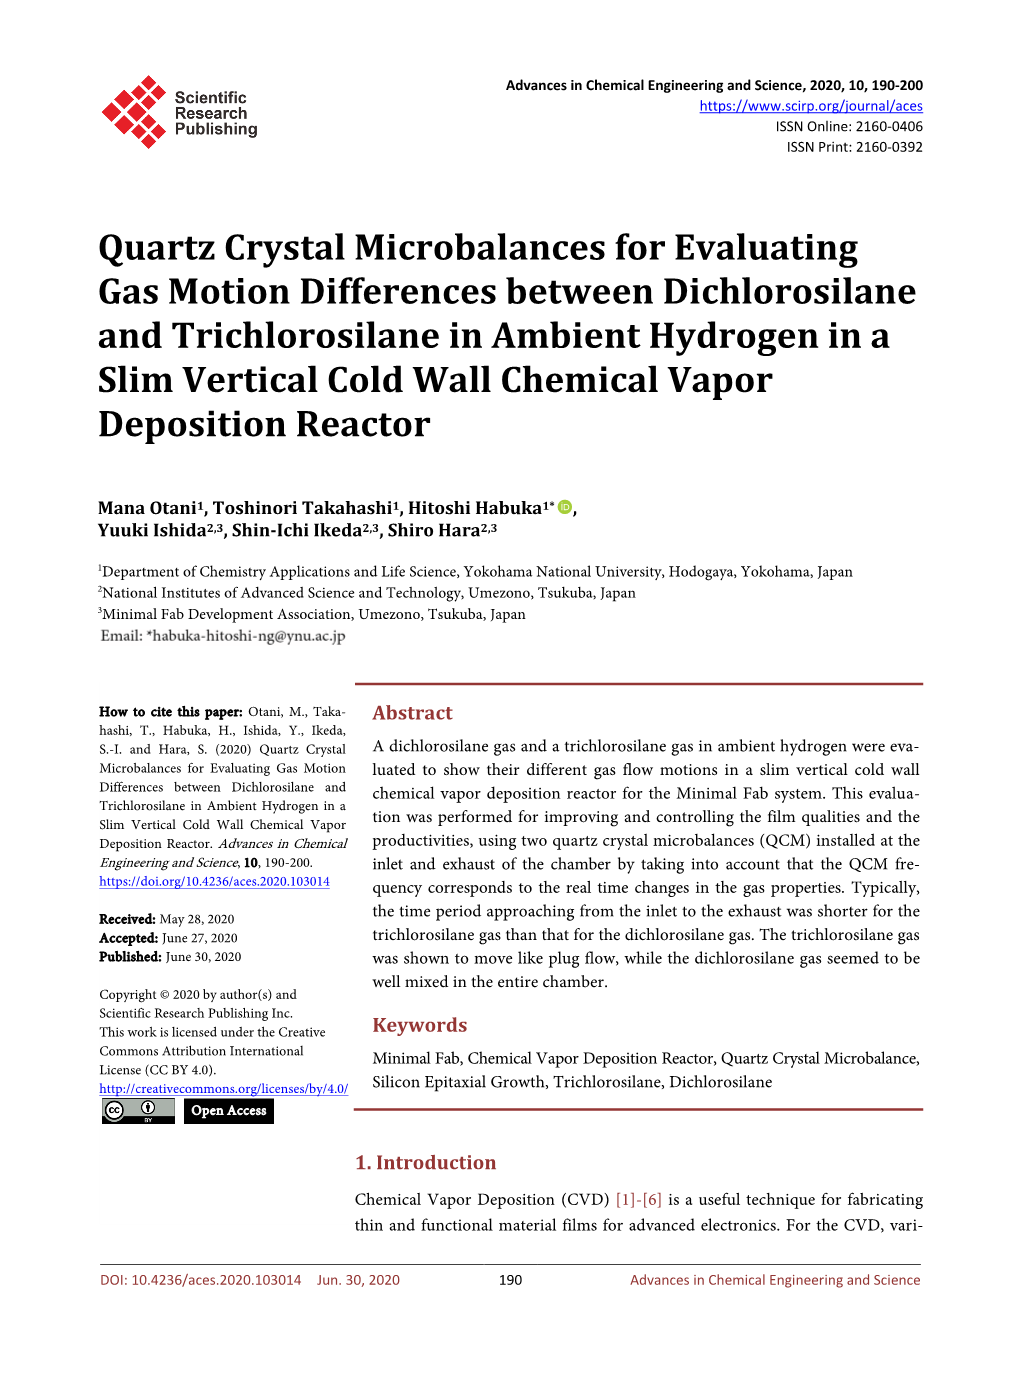 Quartz Crystal Microbalances for Evaluating Gas Motion Differences Between Dichlorosilane and Trichlorosilane in Ambient Hydrog